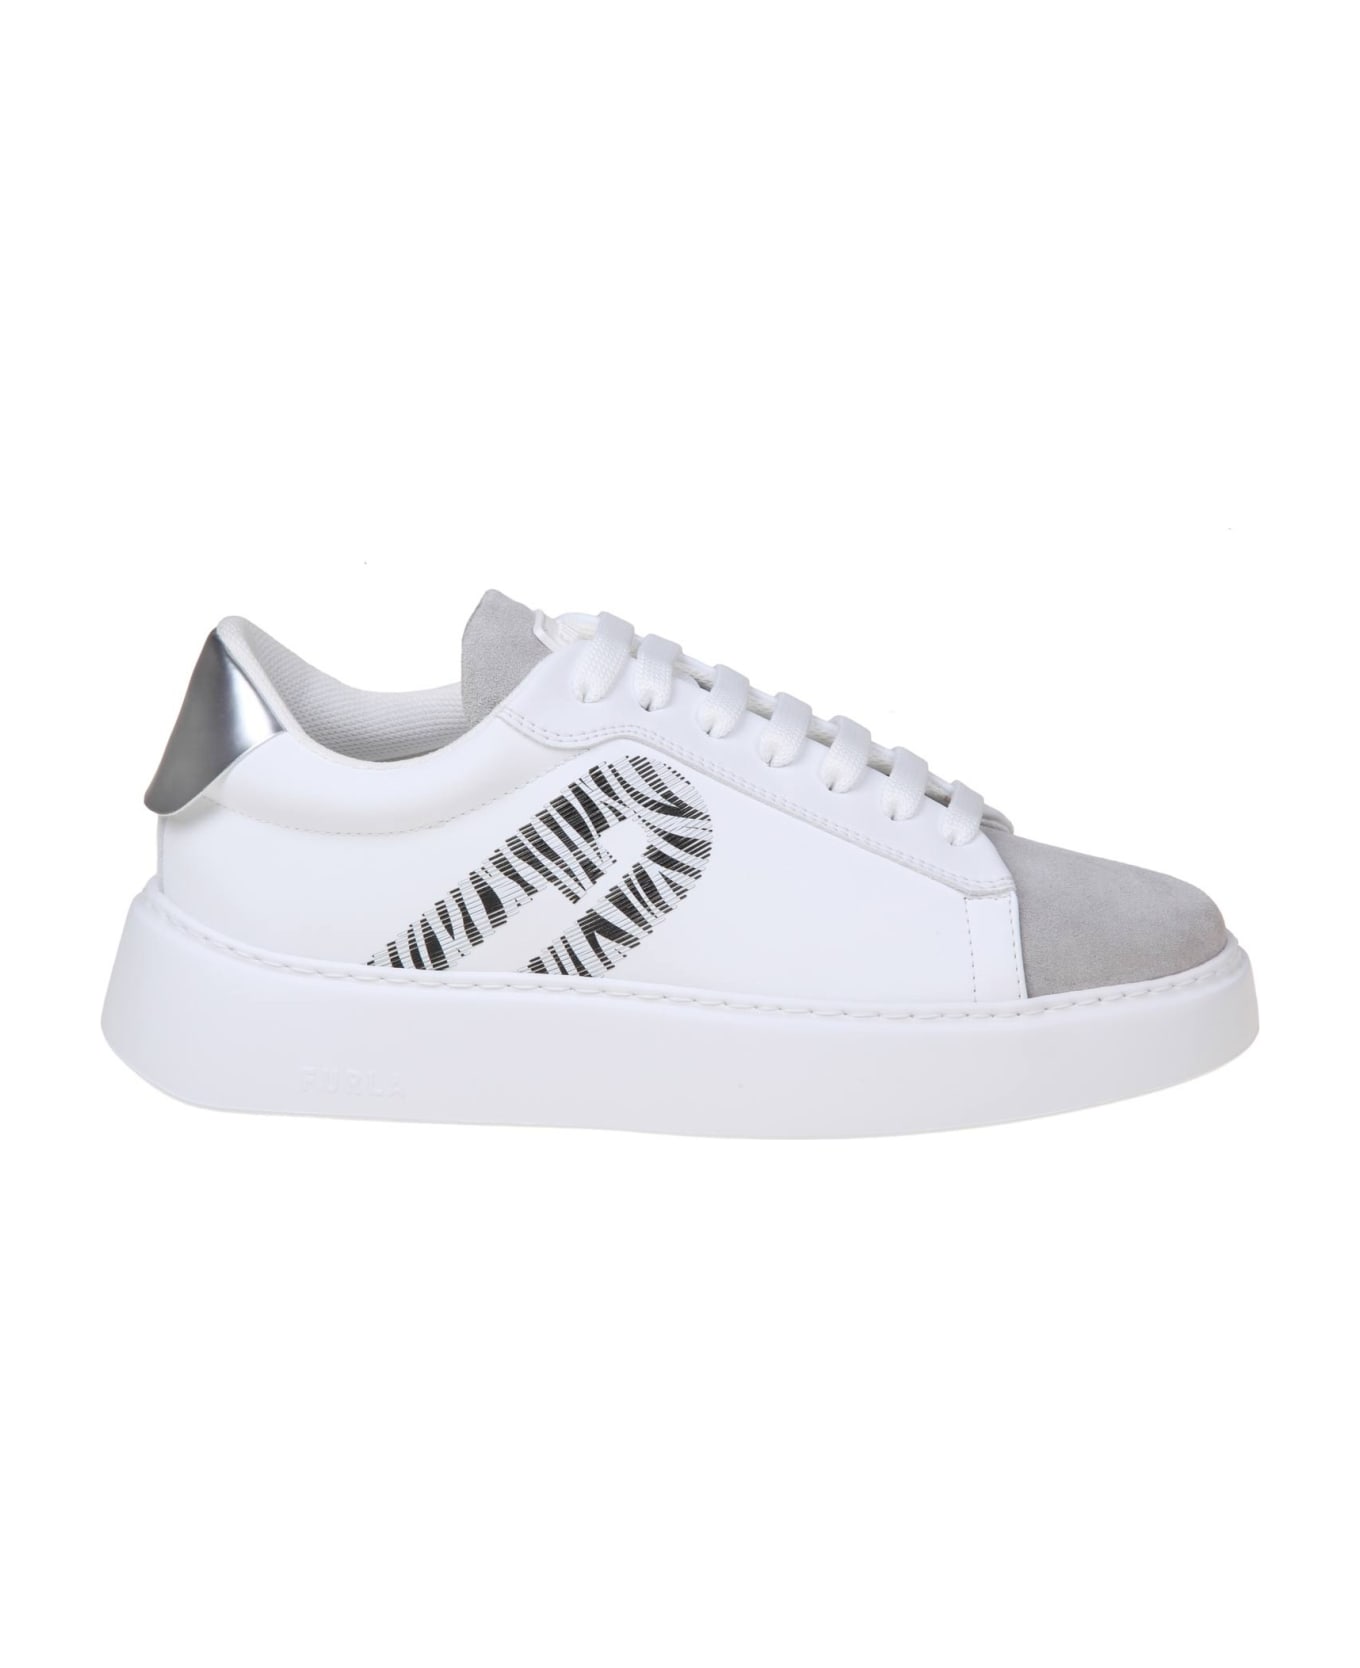 Furla Sports Sneakers In White Leather - White